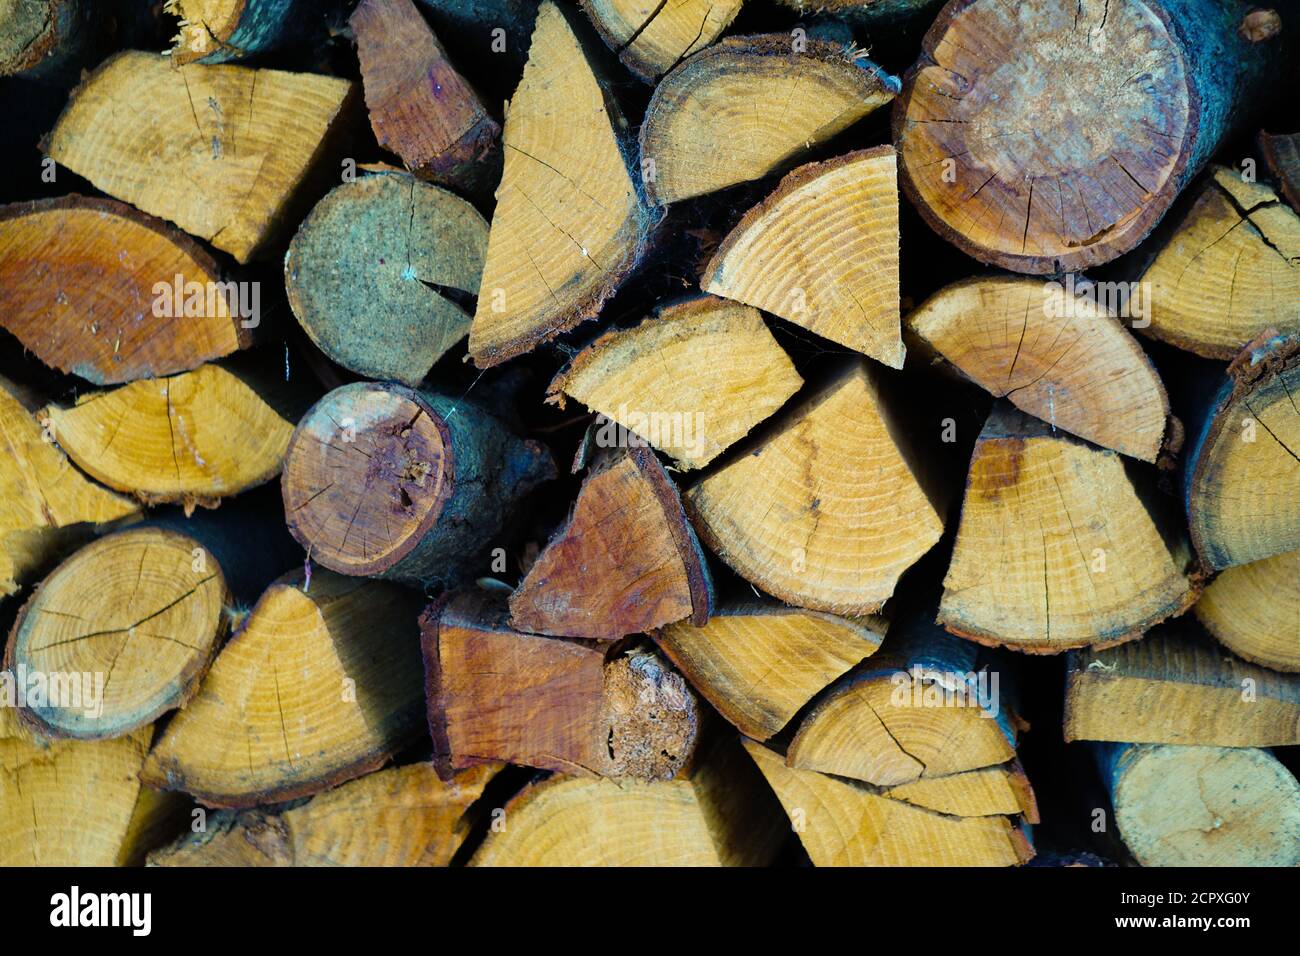 Axed burn wood pile texture background Stock Photo